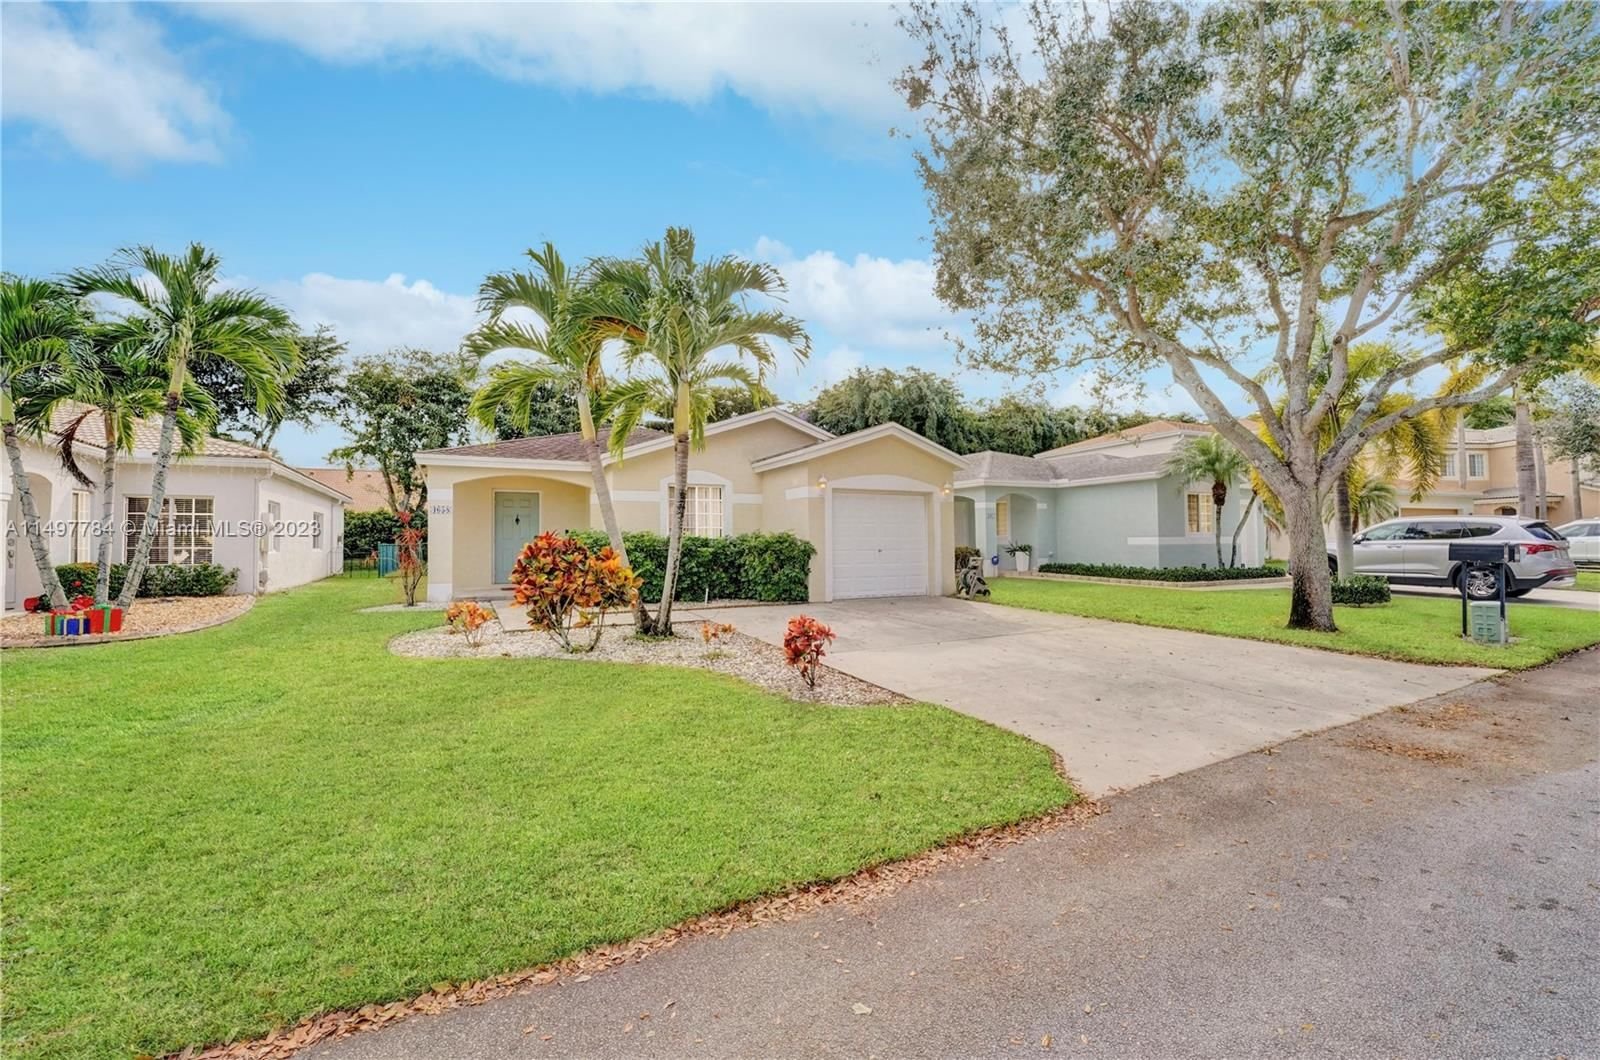 Real estate property located at 4658 12th Ct, Broward County, The Waterways, Deerfield Beach, FL